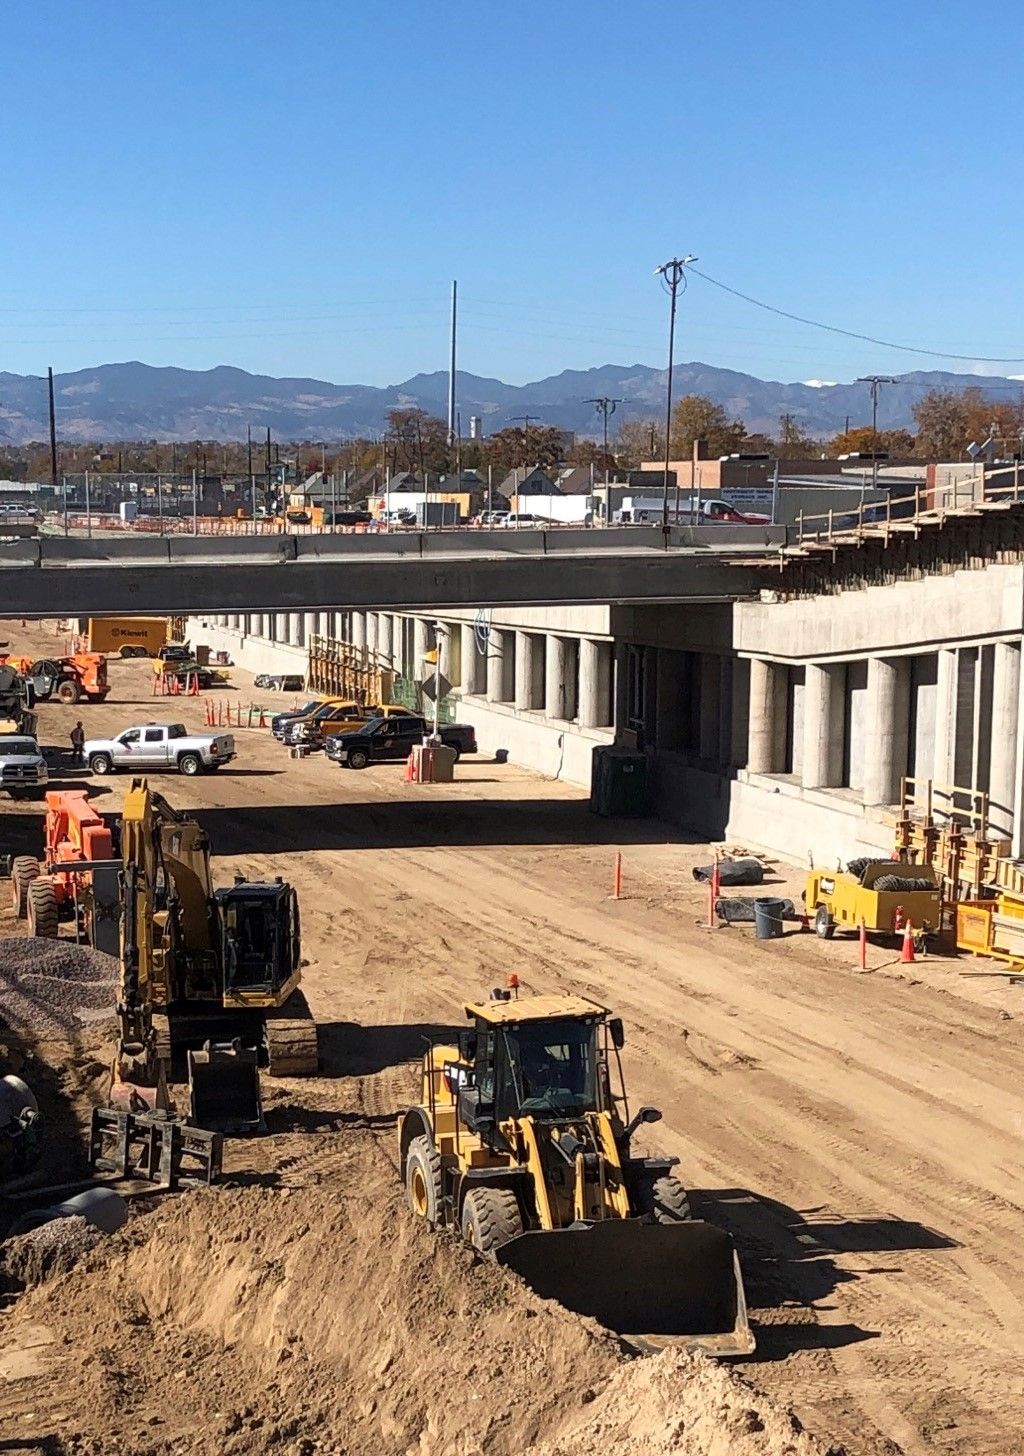 Construction work on the future lowered lanes of eastbound I-70 detail image